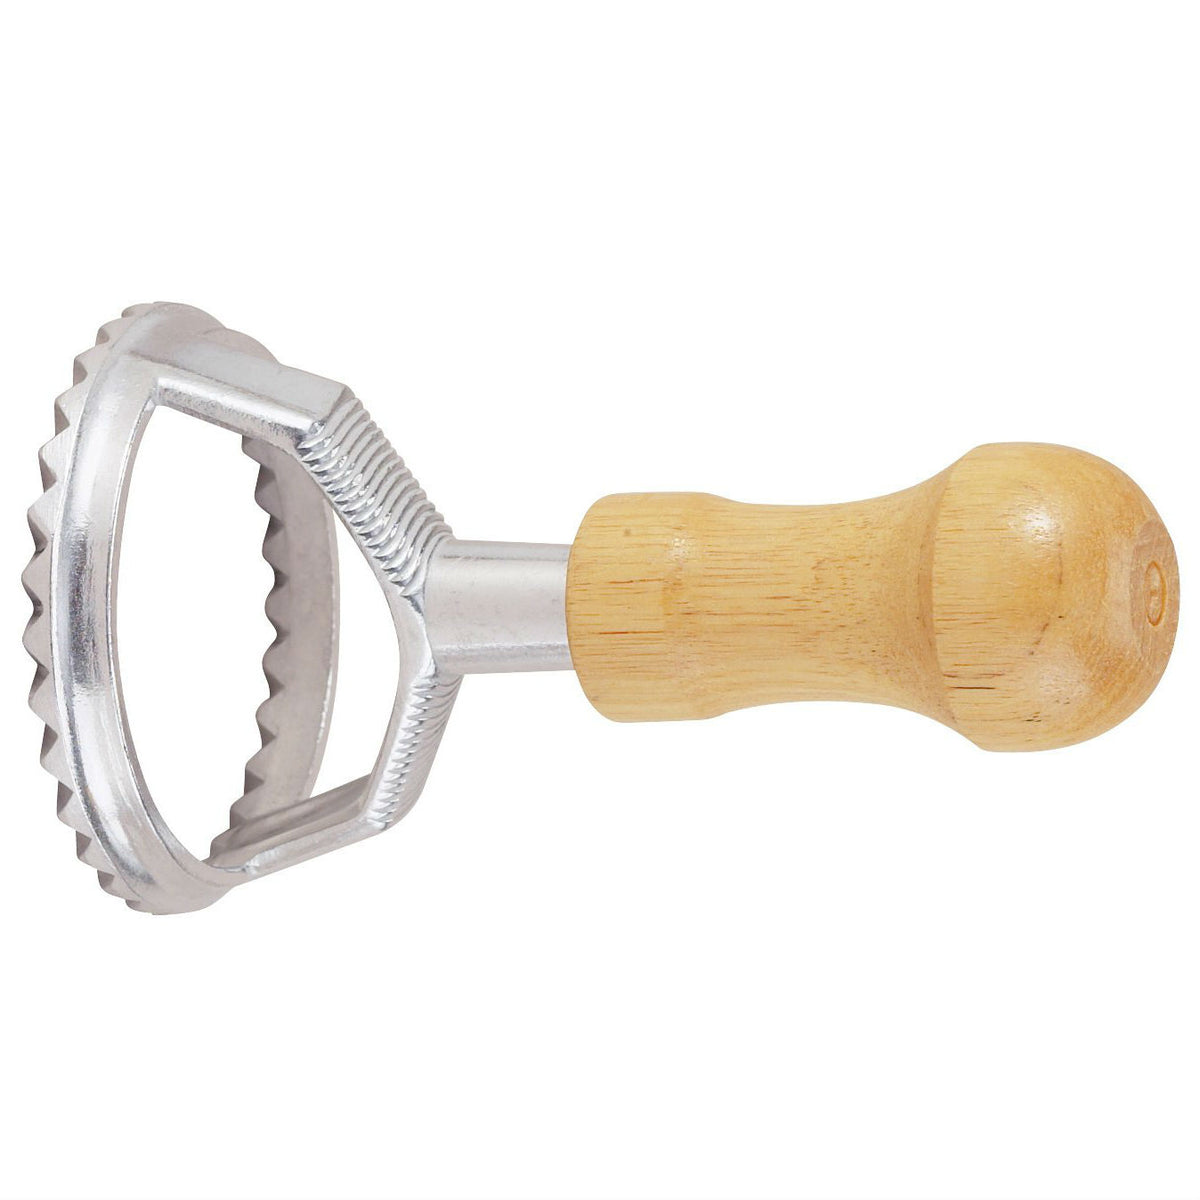 buy pasta & pizza tools at cheap rate in bulk. wholesale & retail kitchenware supplies store.